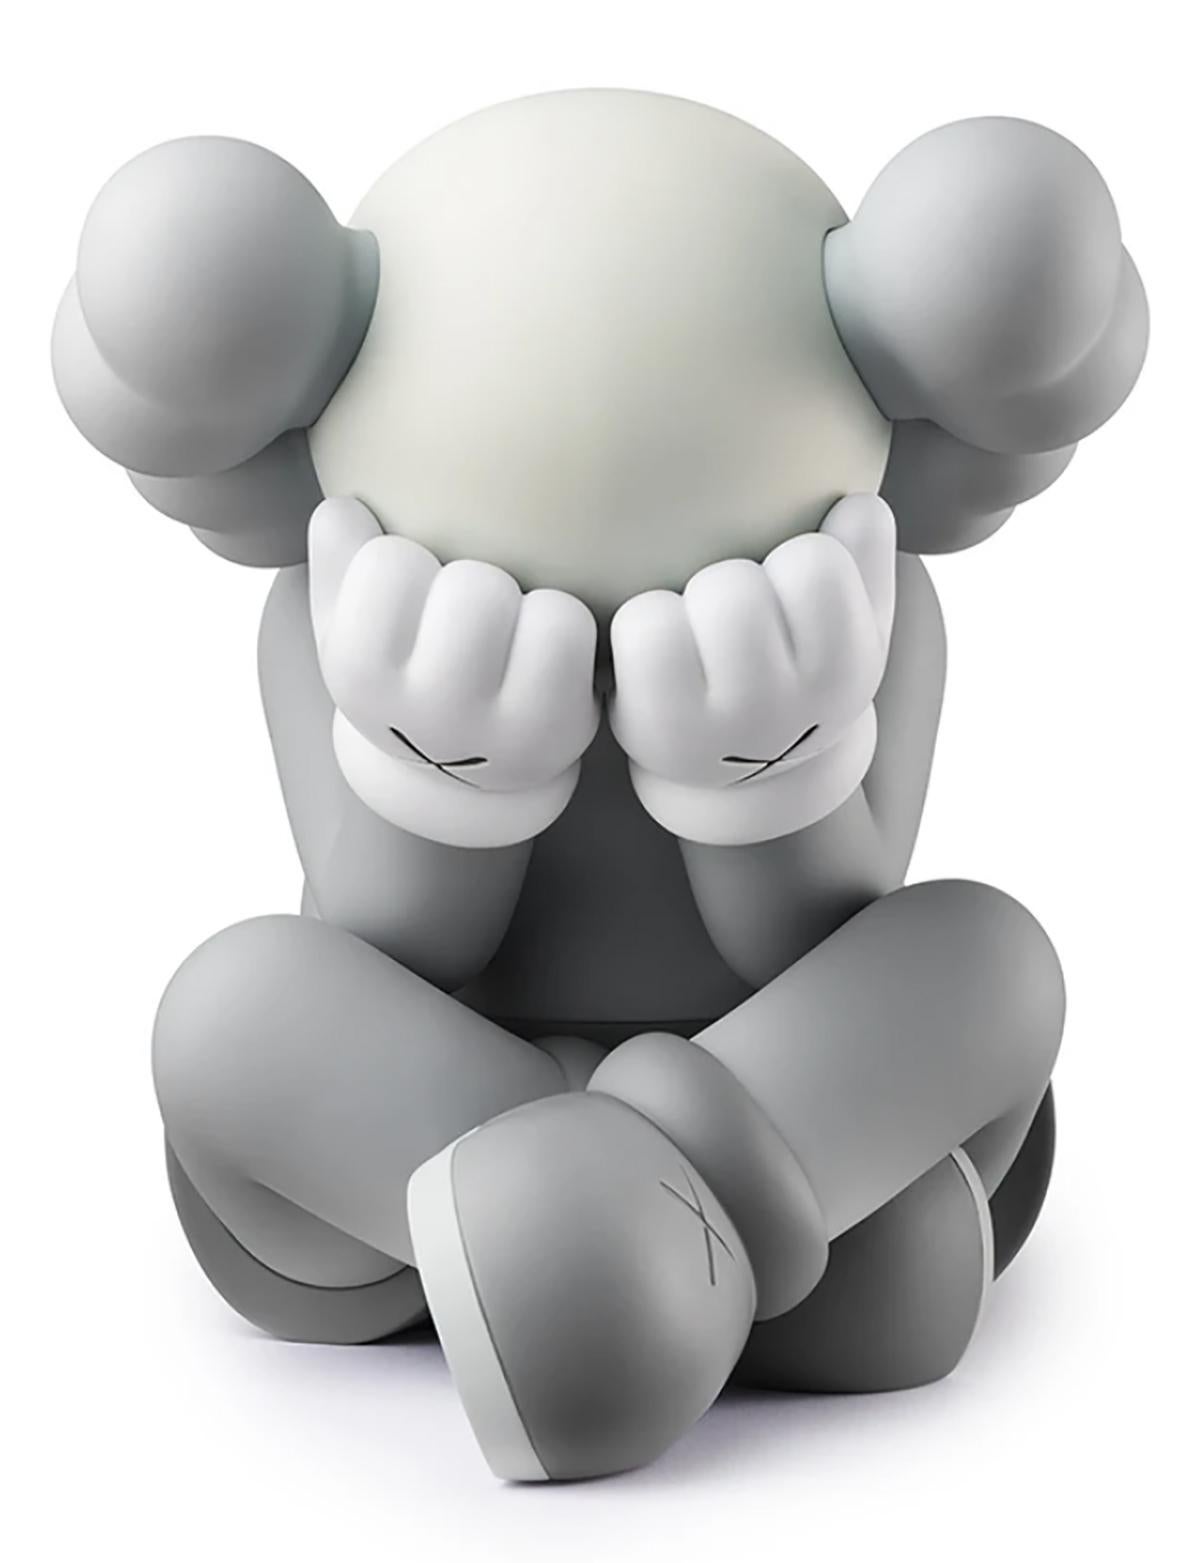 KAWS SEPARATED COMPANION: New & unopened in its original packaging:
This highly collectible grey KAWS SEPARATED figure is derived from the Brooklyn based artist’s larger scale sculpture of same (originally constructed in 2019), and is a key